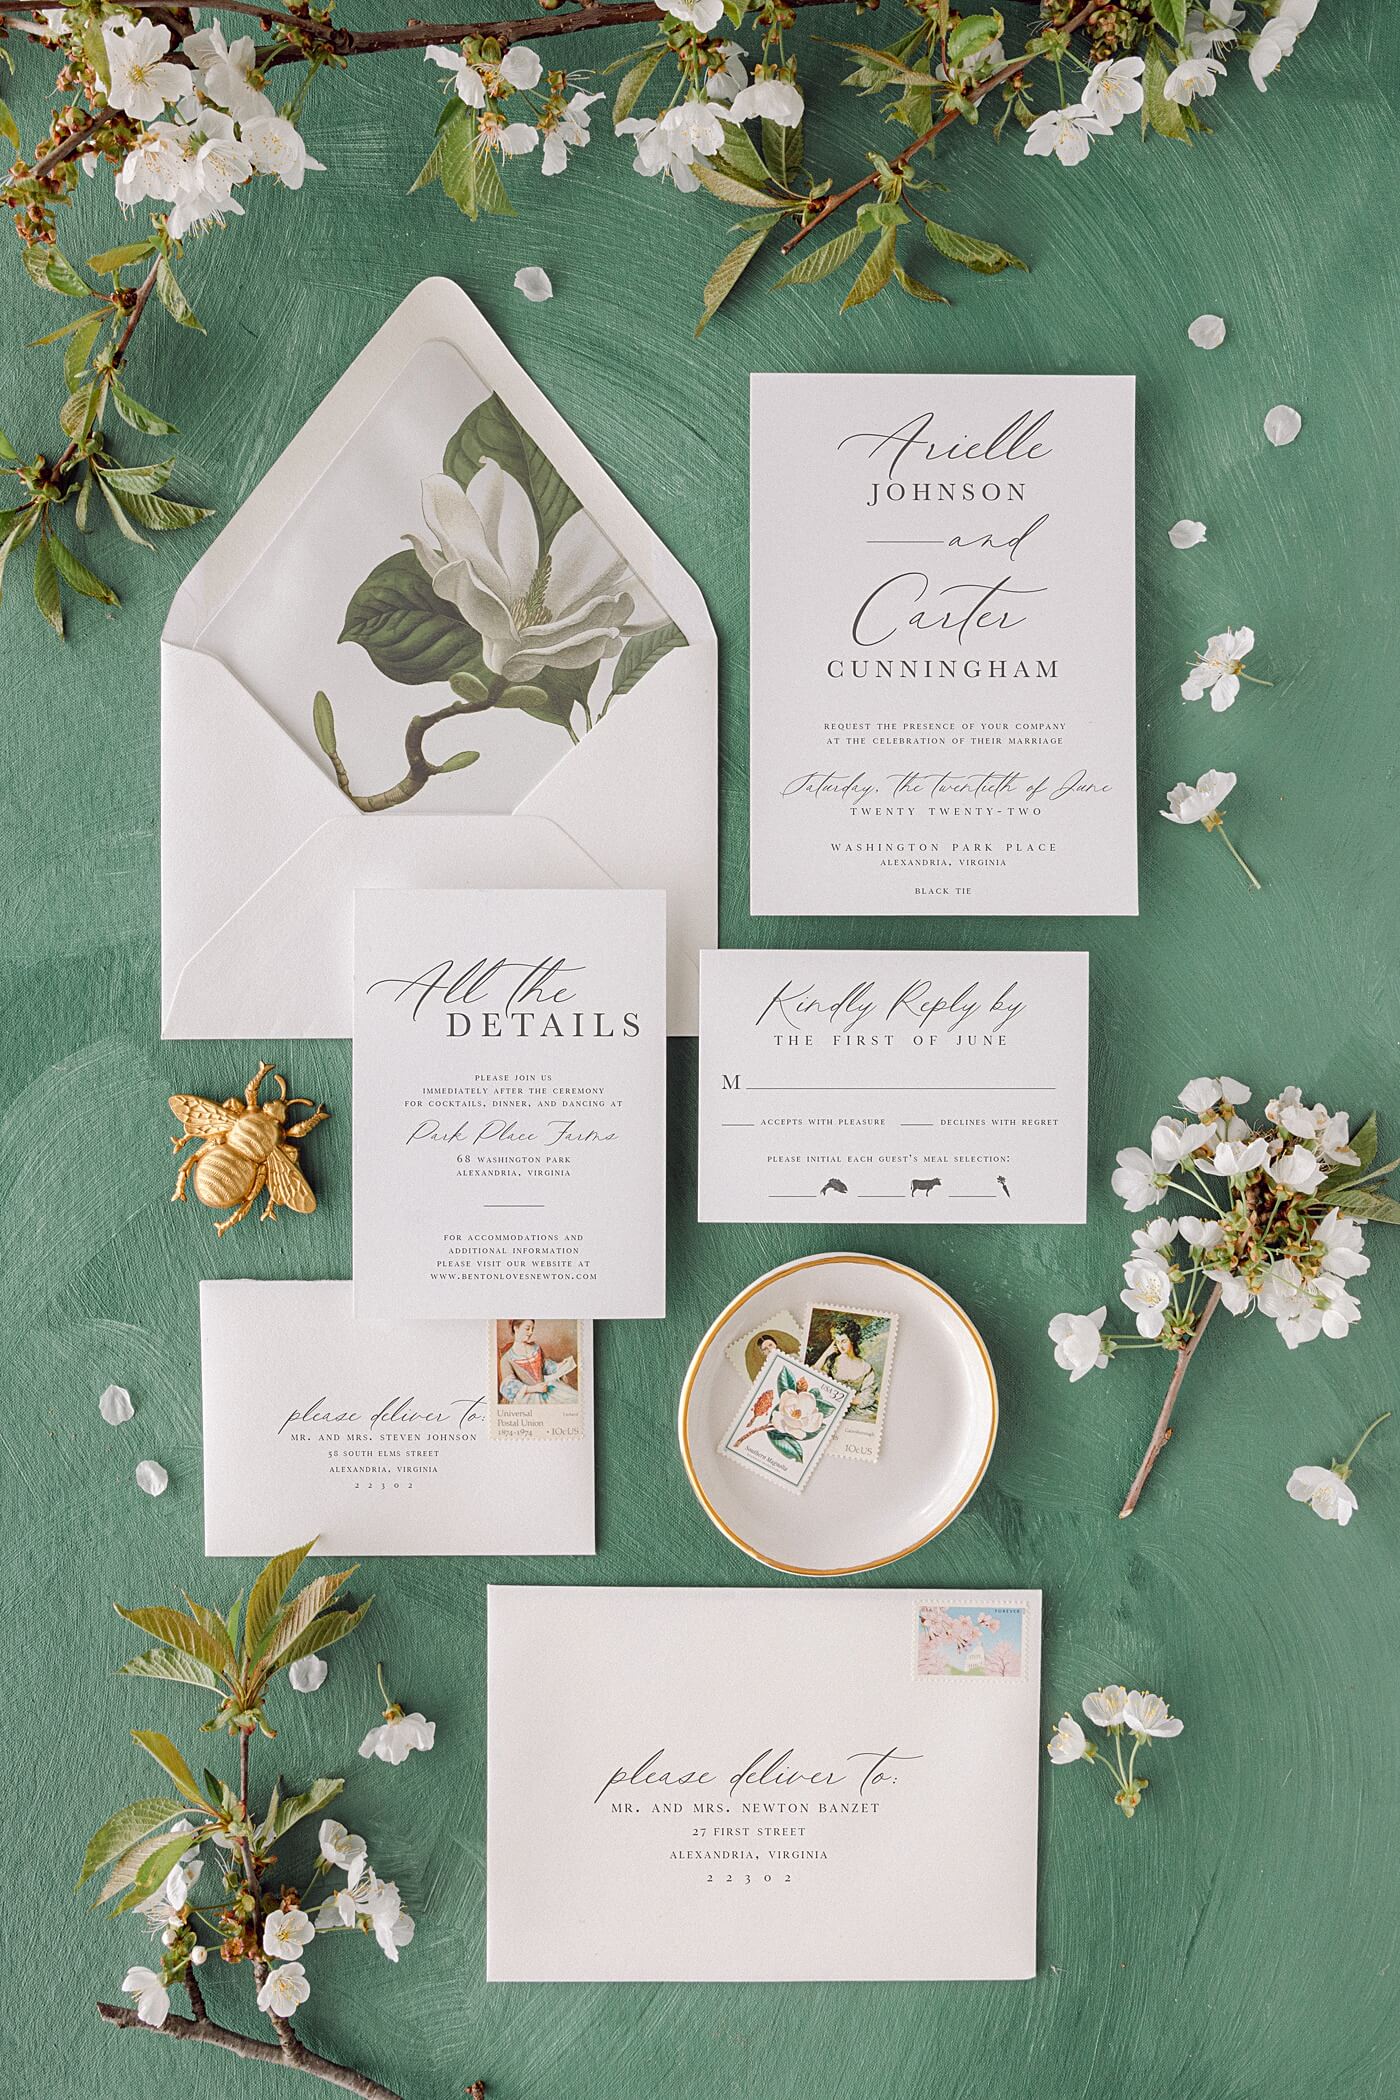 Pin on Wedding Invitations - A mix of Traditional, Unique, Modern and  Classic Styles